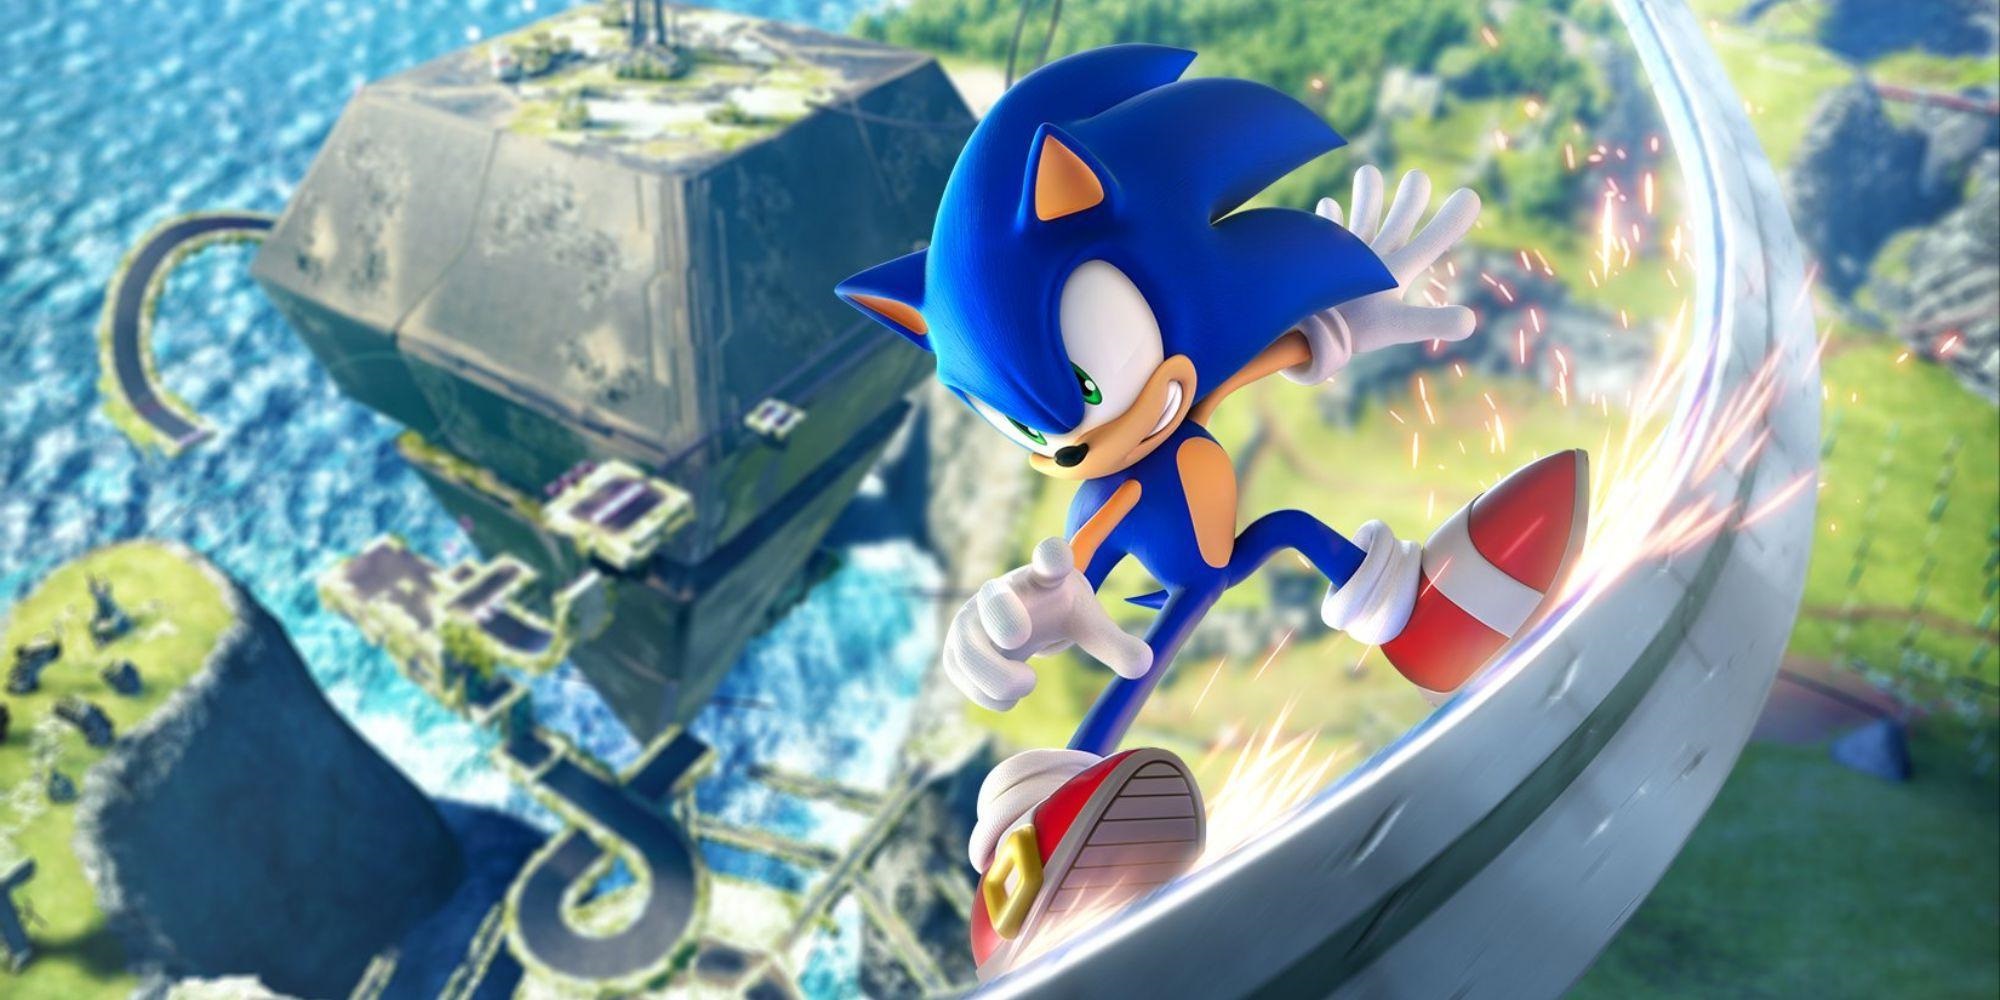 sonic frontiers dlc story speculation